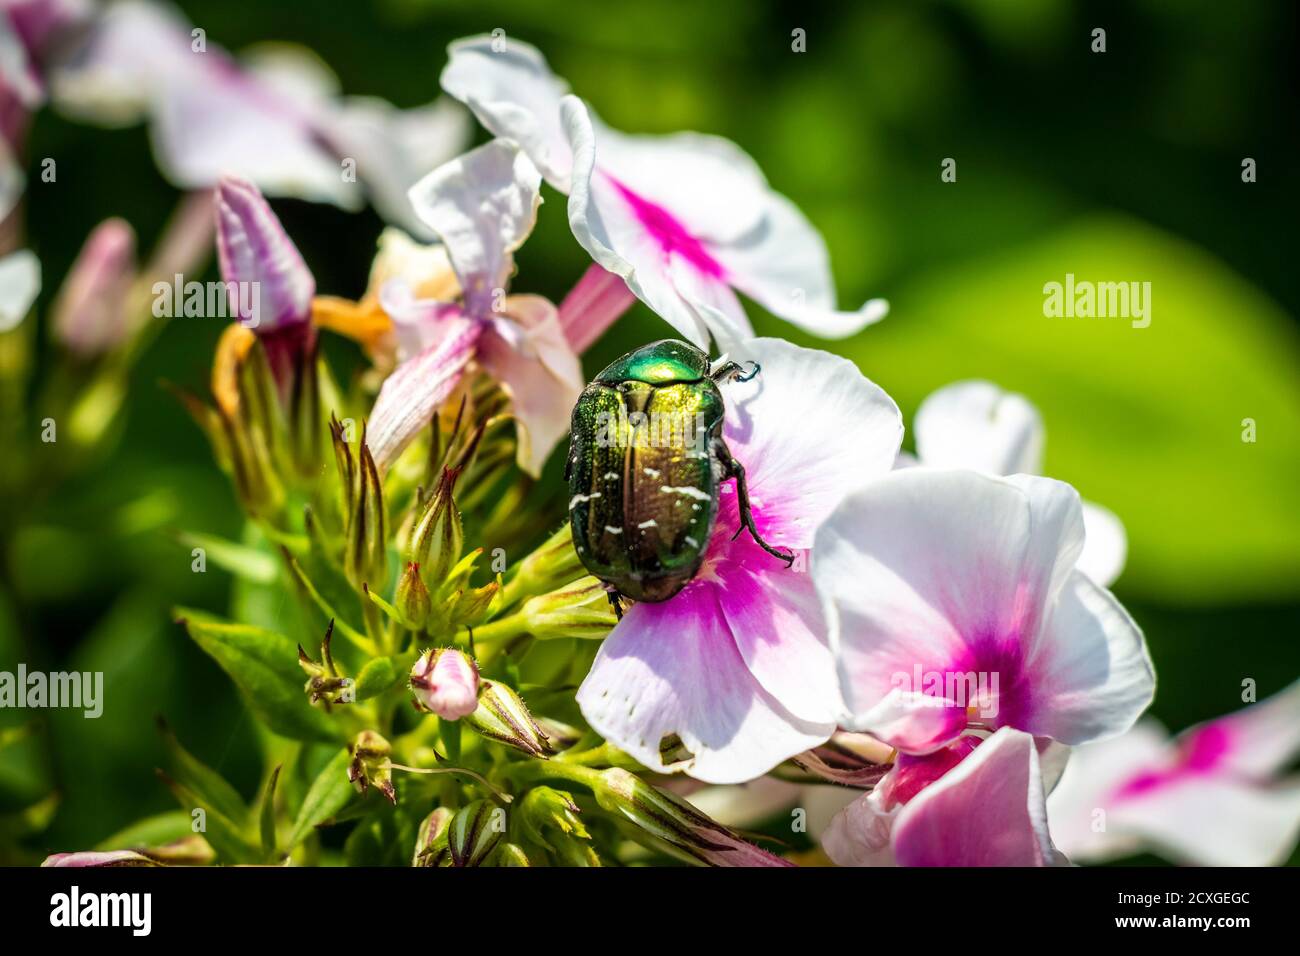 Green large beetle on a flower close-up. Stock Photo